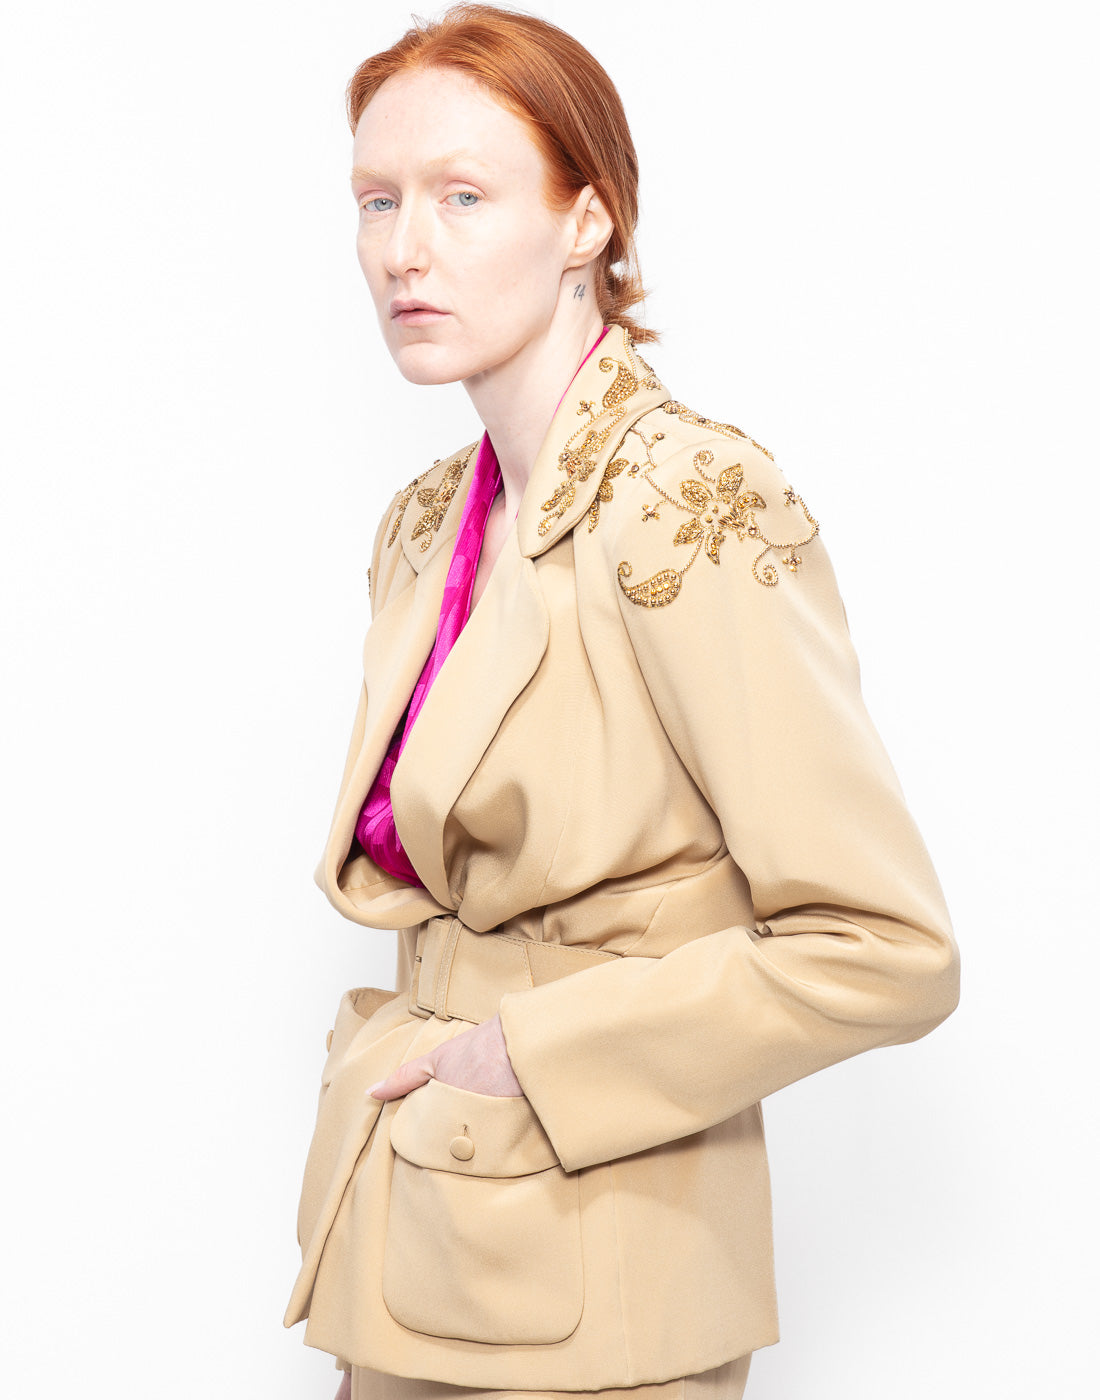 Archive beige blazer + skirt suit with beaded floral embellishments from André Laug